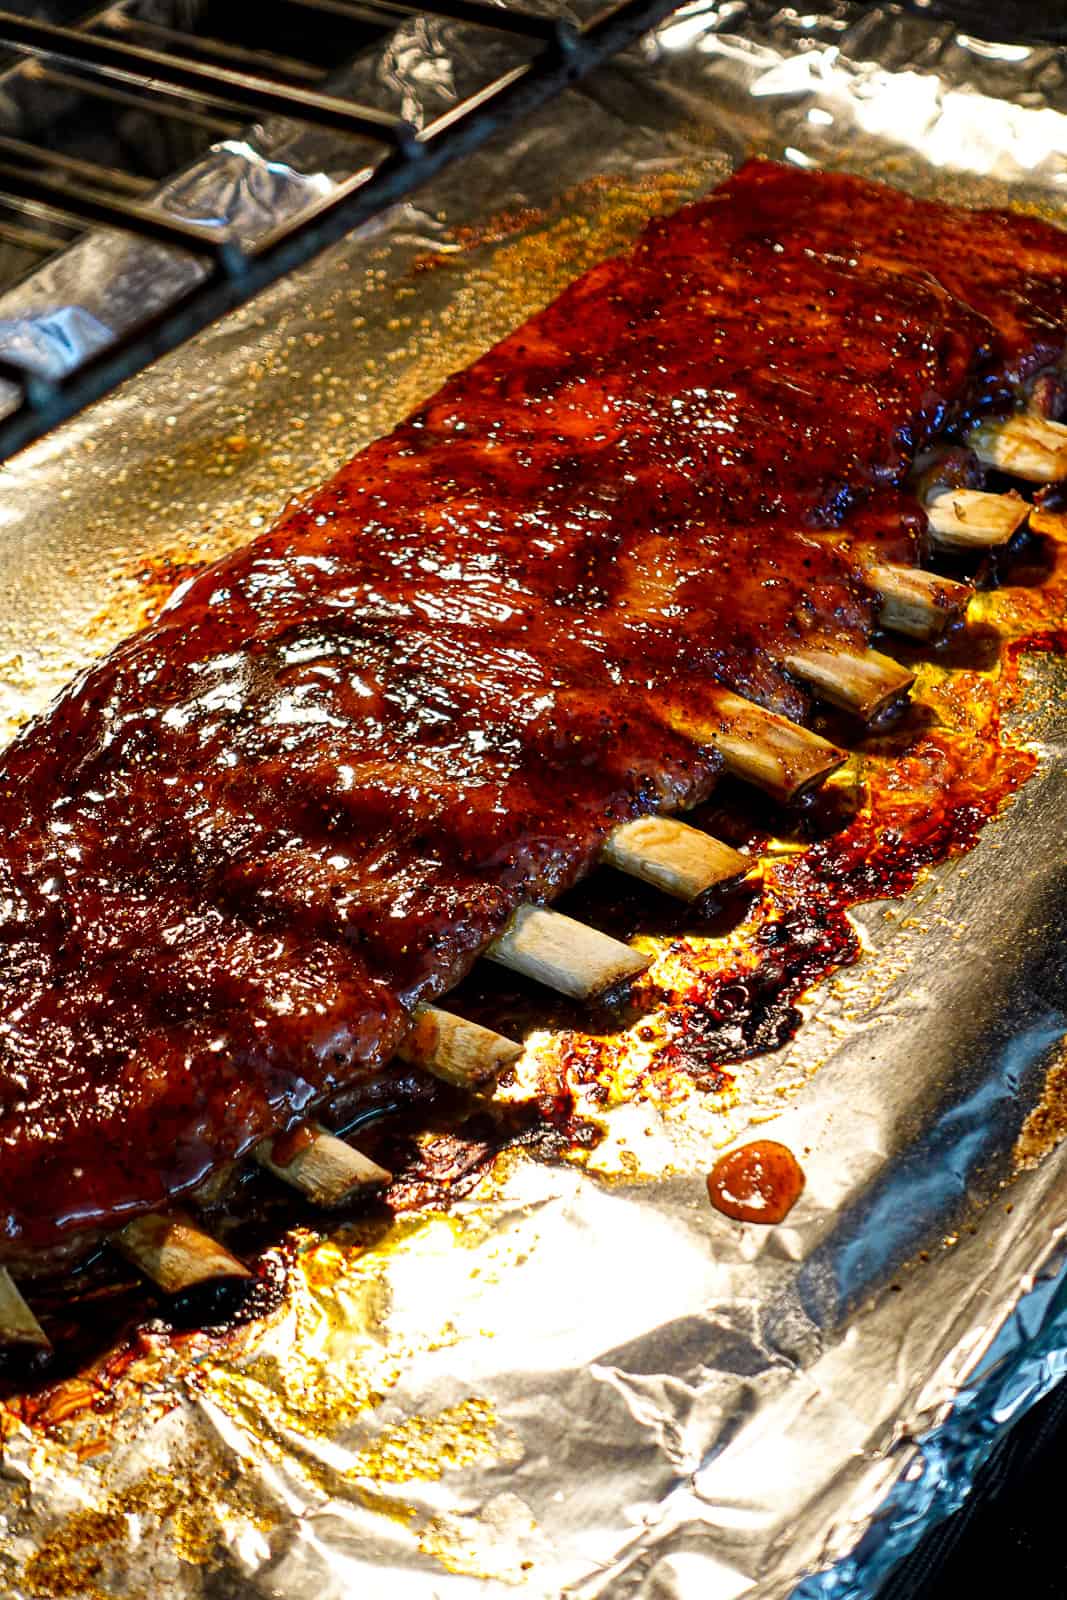 Baking St. Louis Ribs In The Oven